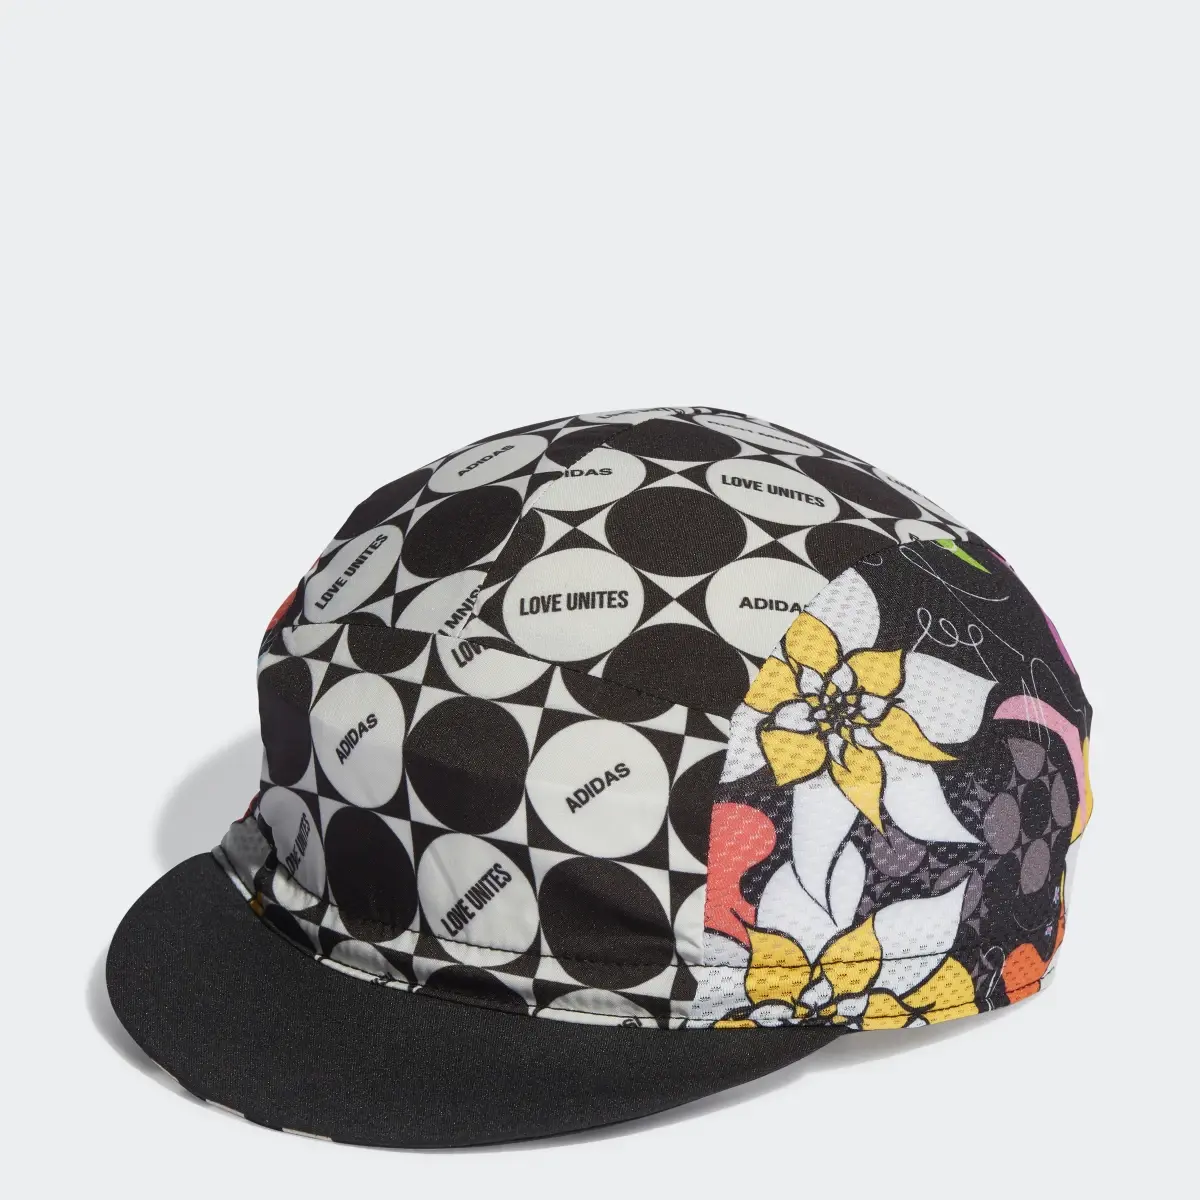 Adidas Casquette Rich Mnisi x The Cycling. 1